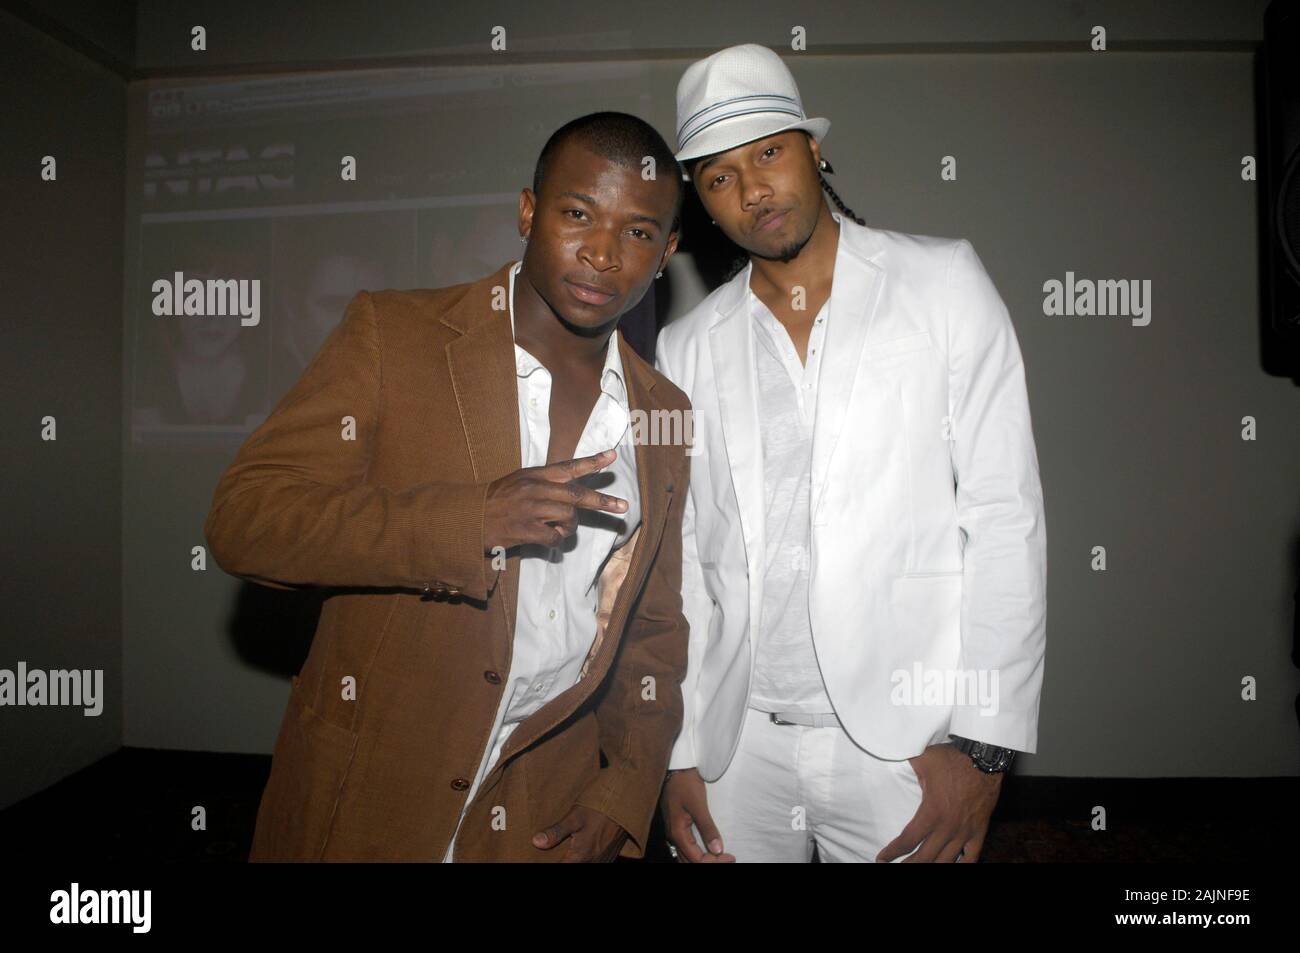 Rapper O.T. Genasis (l) im Norwood Talent Agency Corporation (NTAC) Grand Opening im Hollywood Roosevelt Hotel am 10. Mai 2011 in Los Angeles. Stockfoto